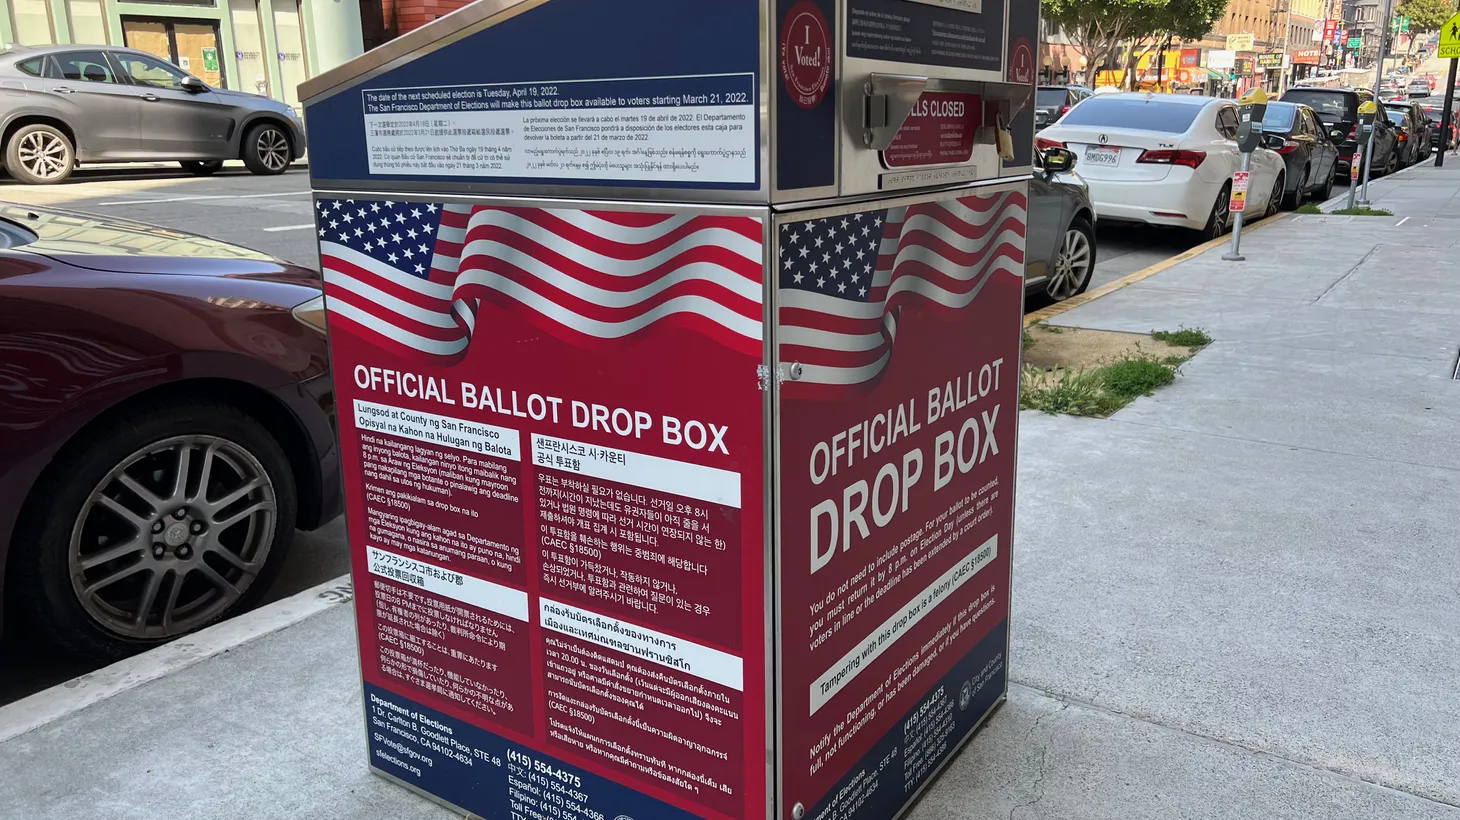 An official ballot drop box is seen in front of 808 Kearny Street and City College of San Francisco - Chinatown Center on April 24, 2022. Residents voted to recall District Attorney Chesa Boudin on June 7, 2022.